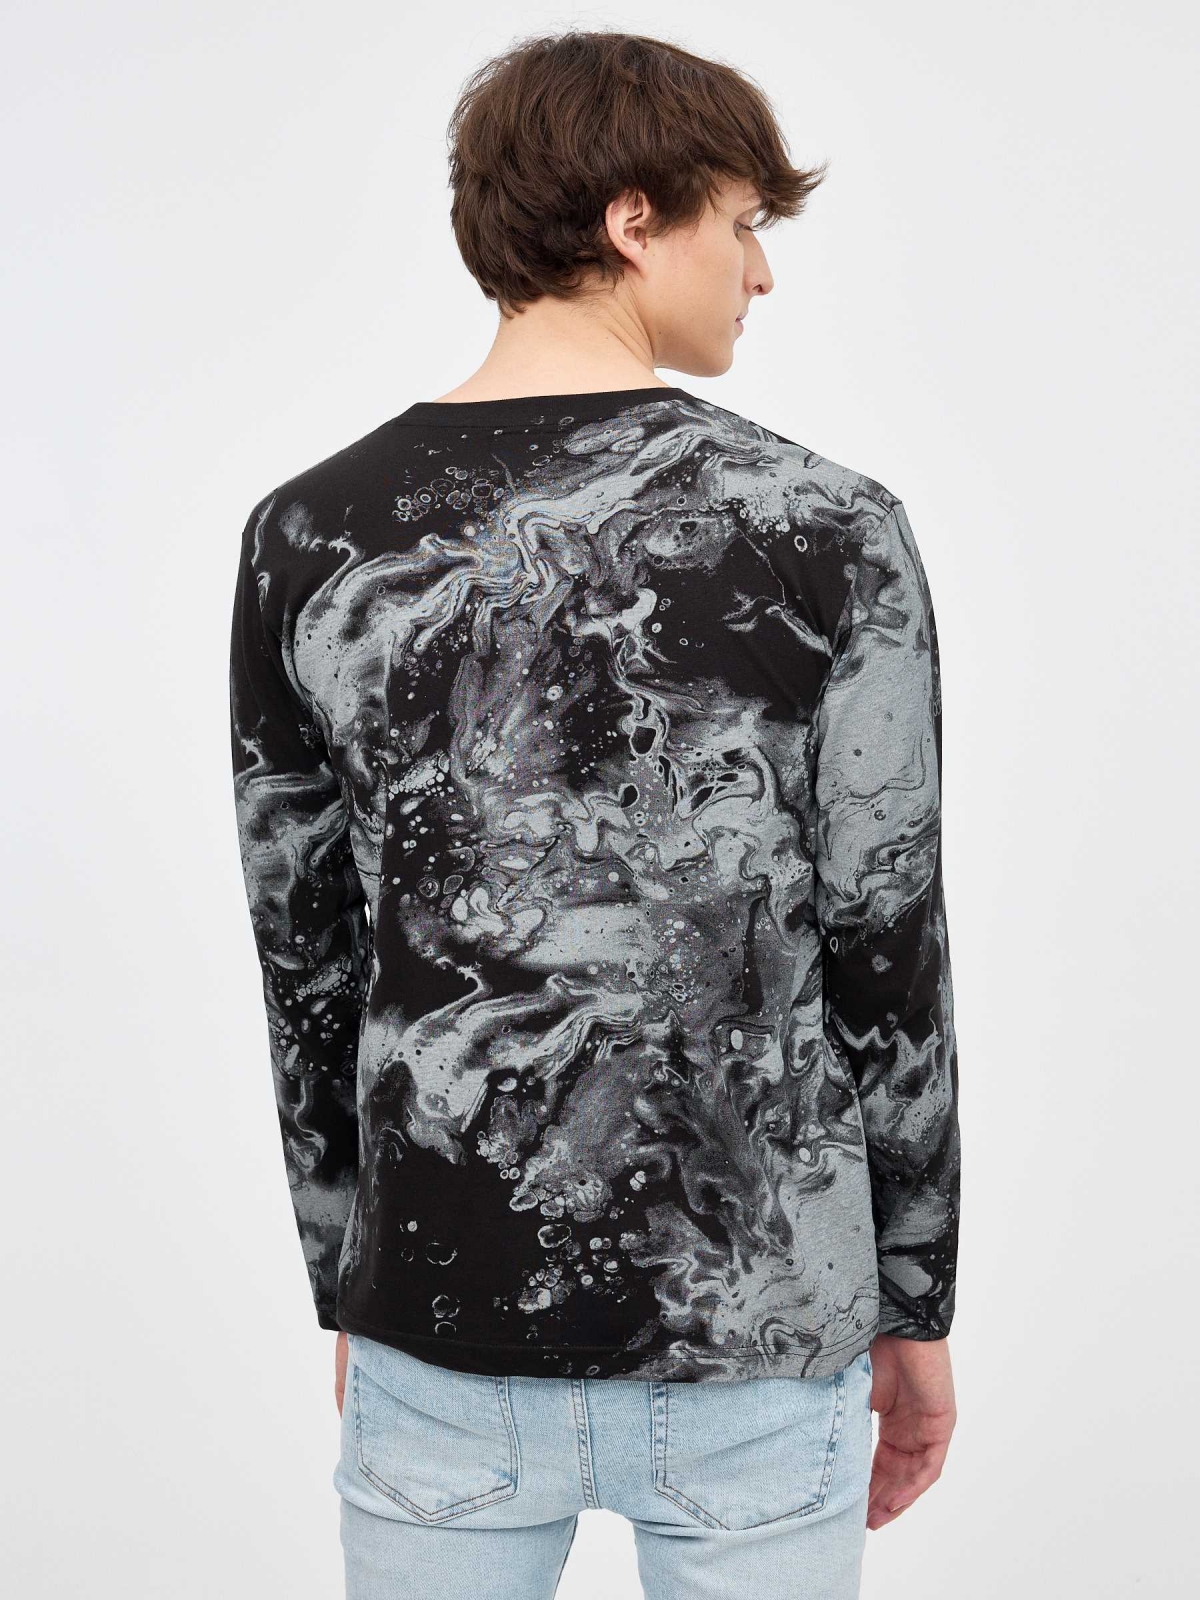 Psychedelic black T-shirt black middle back view